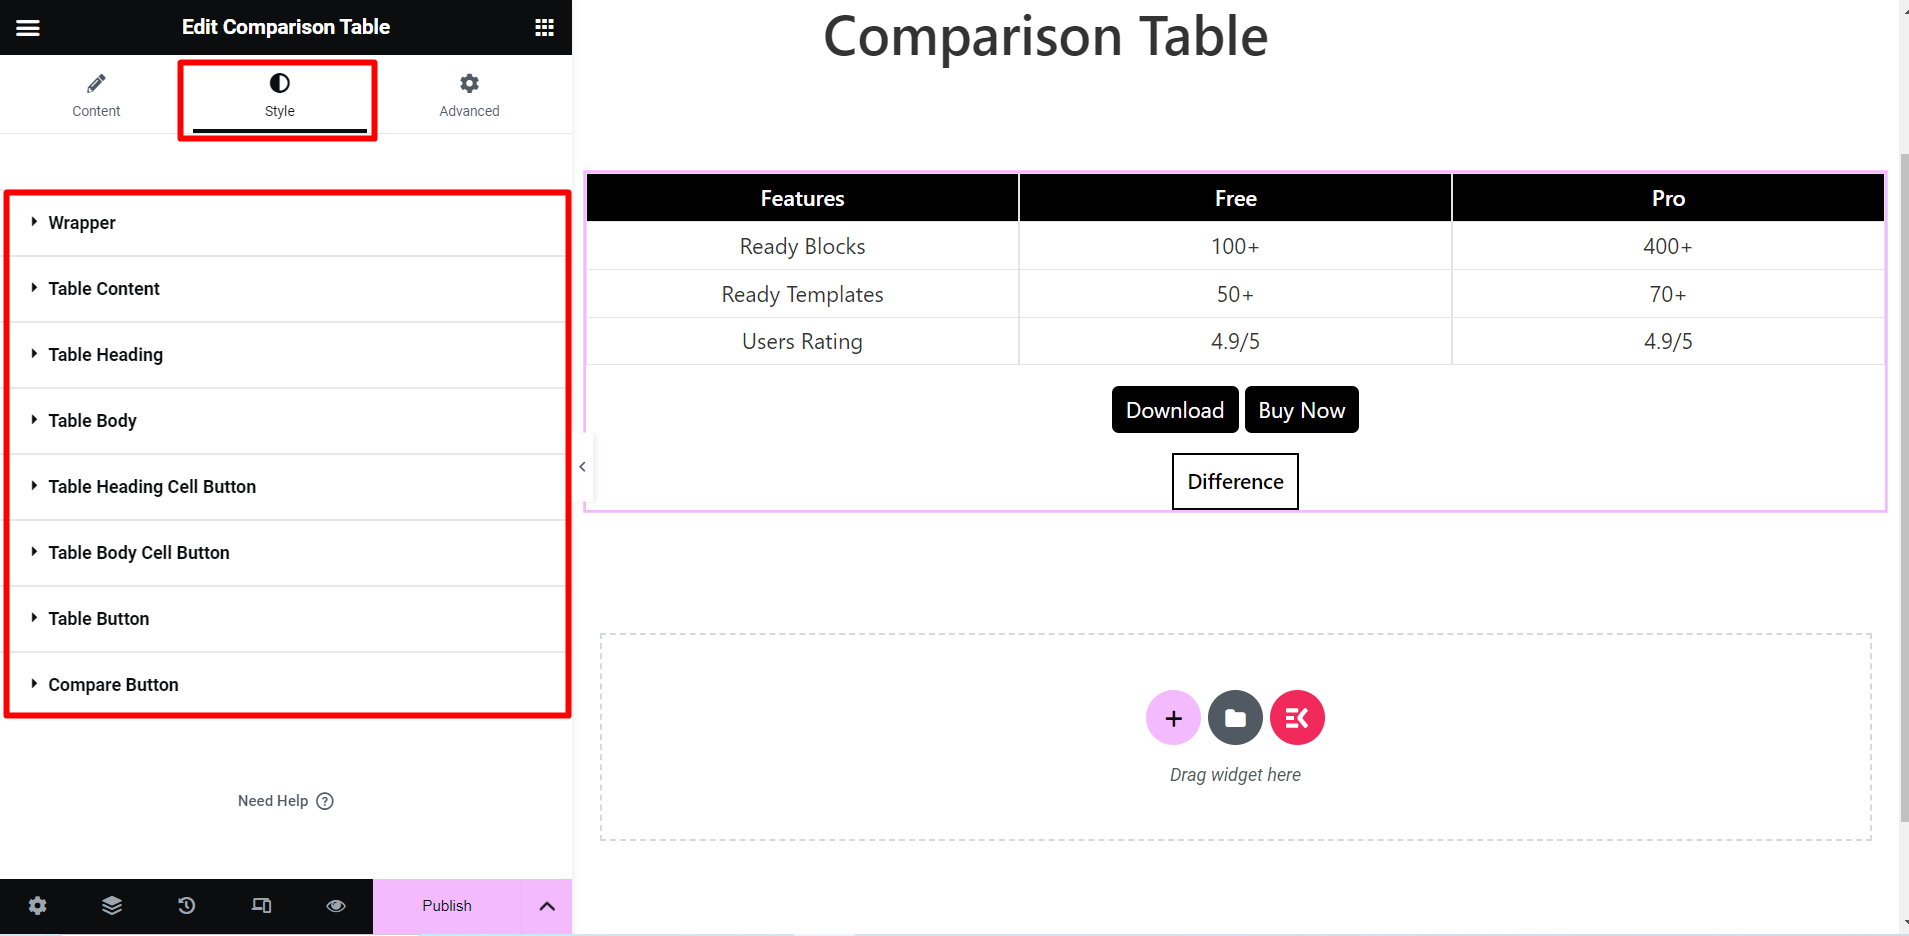 Style your comparison table with EleemntsKit's multiple styling options